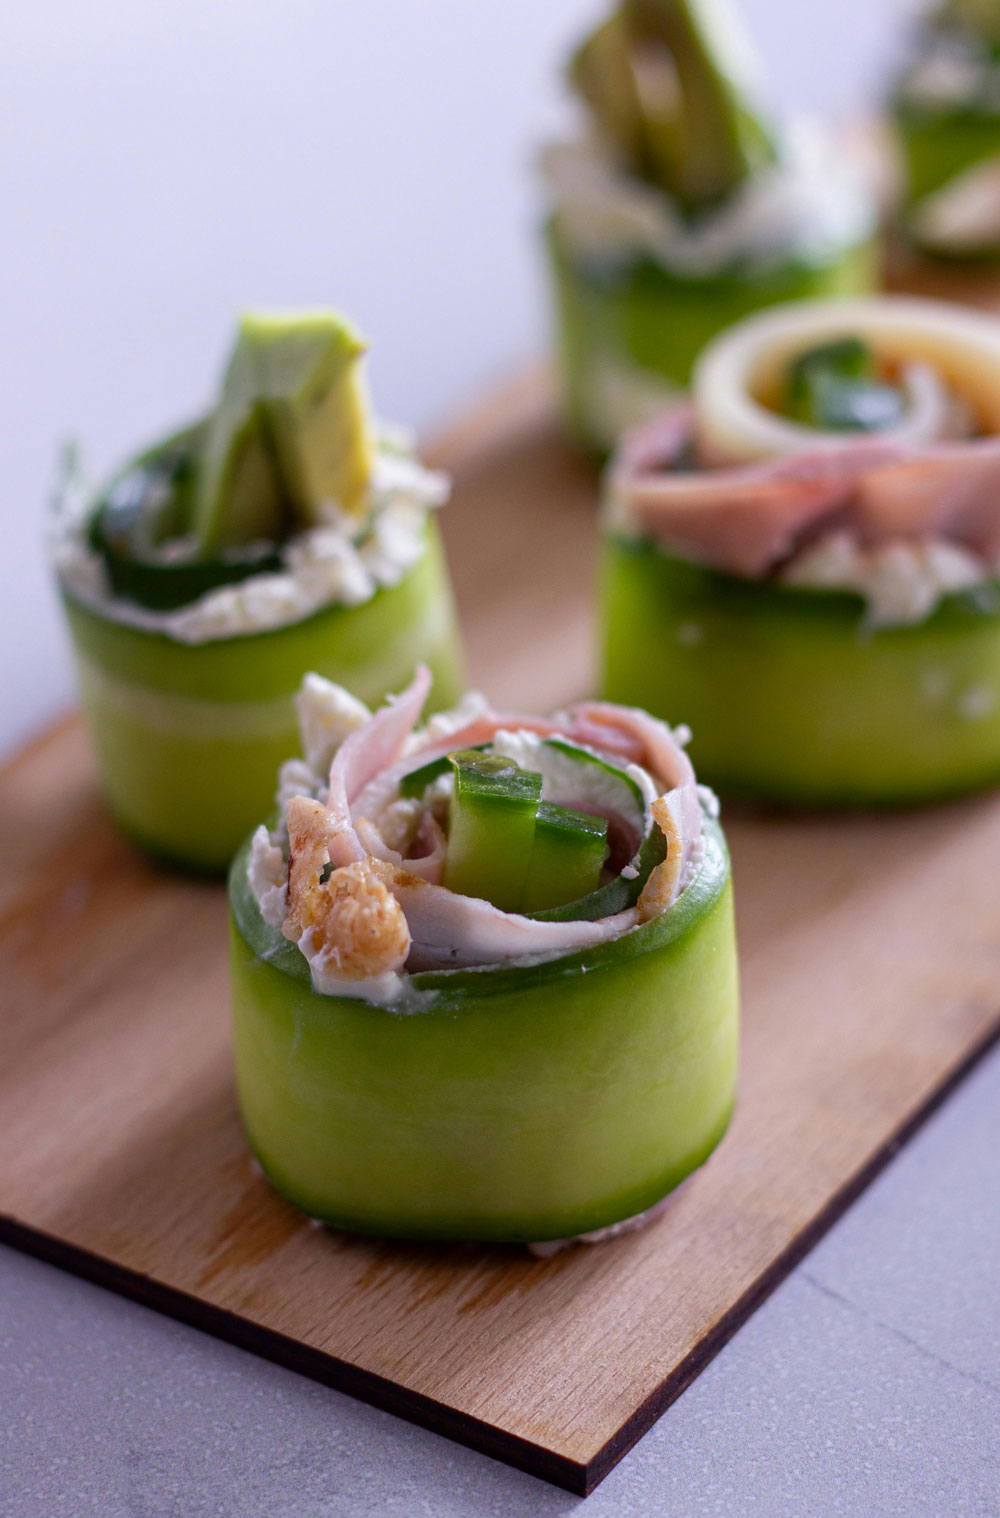 Cucumber Rolls Are All Over TikTok Right Now